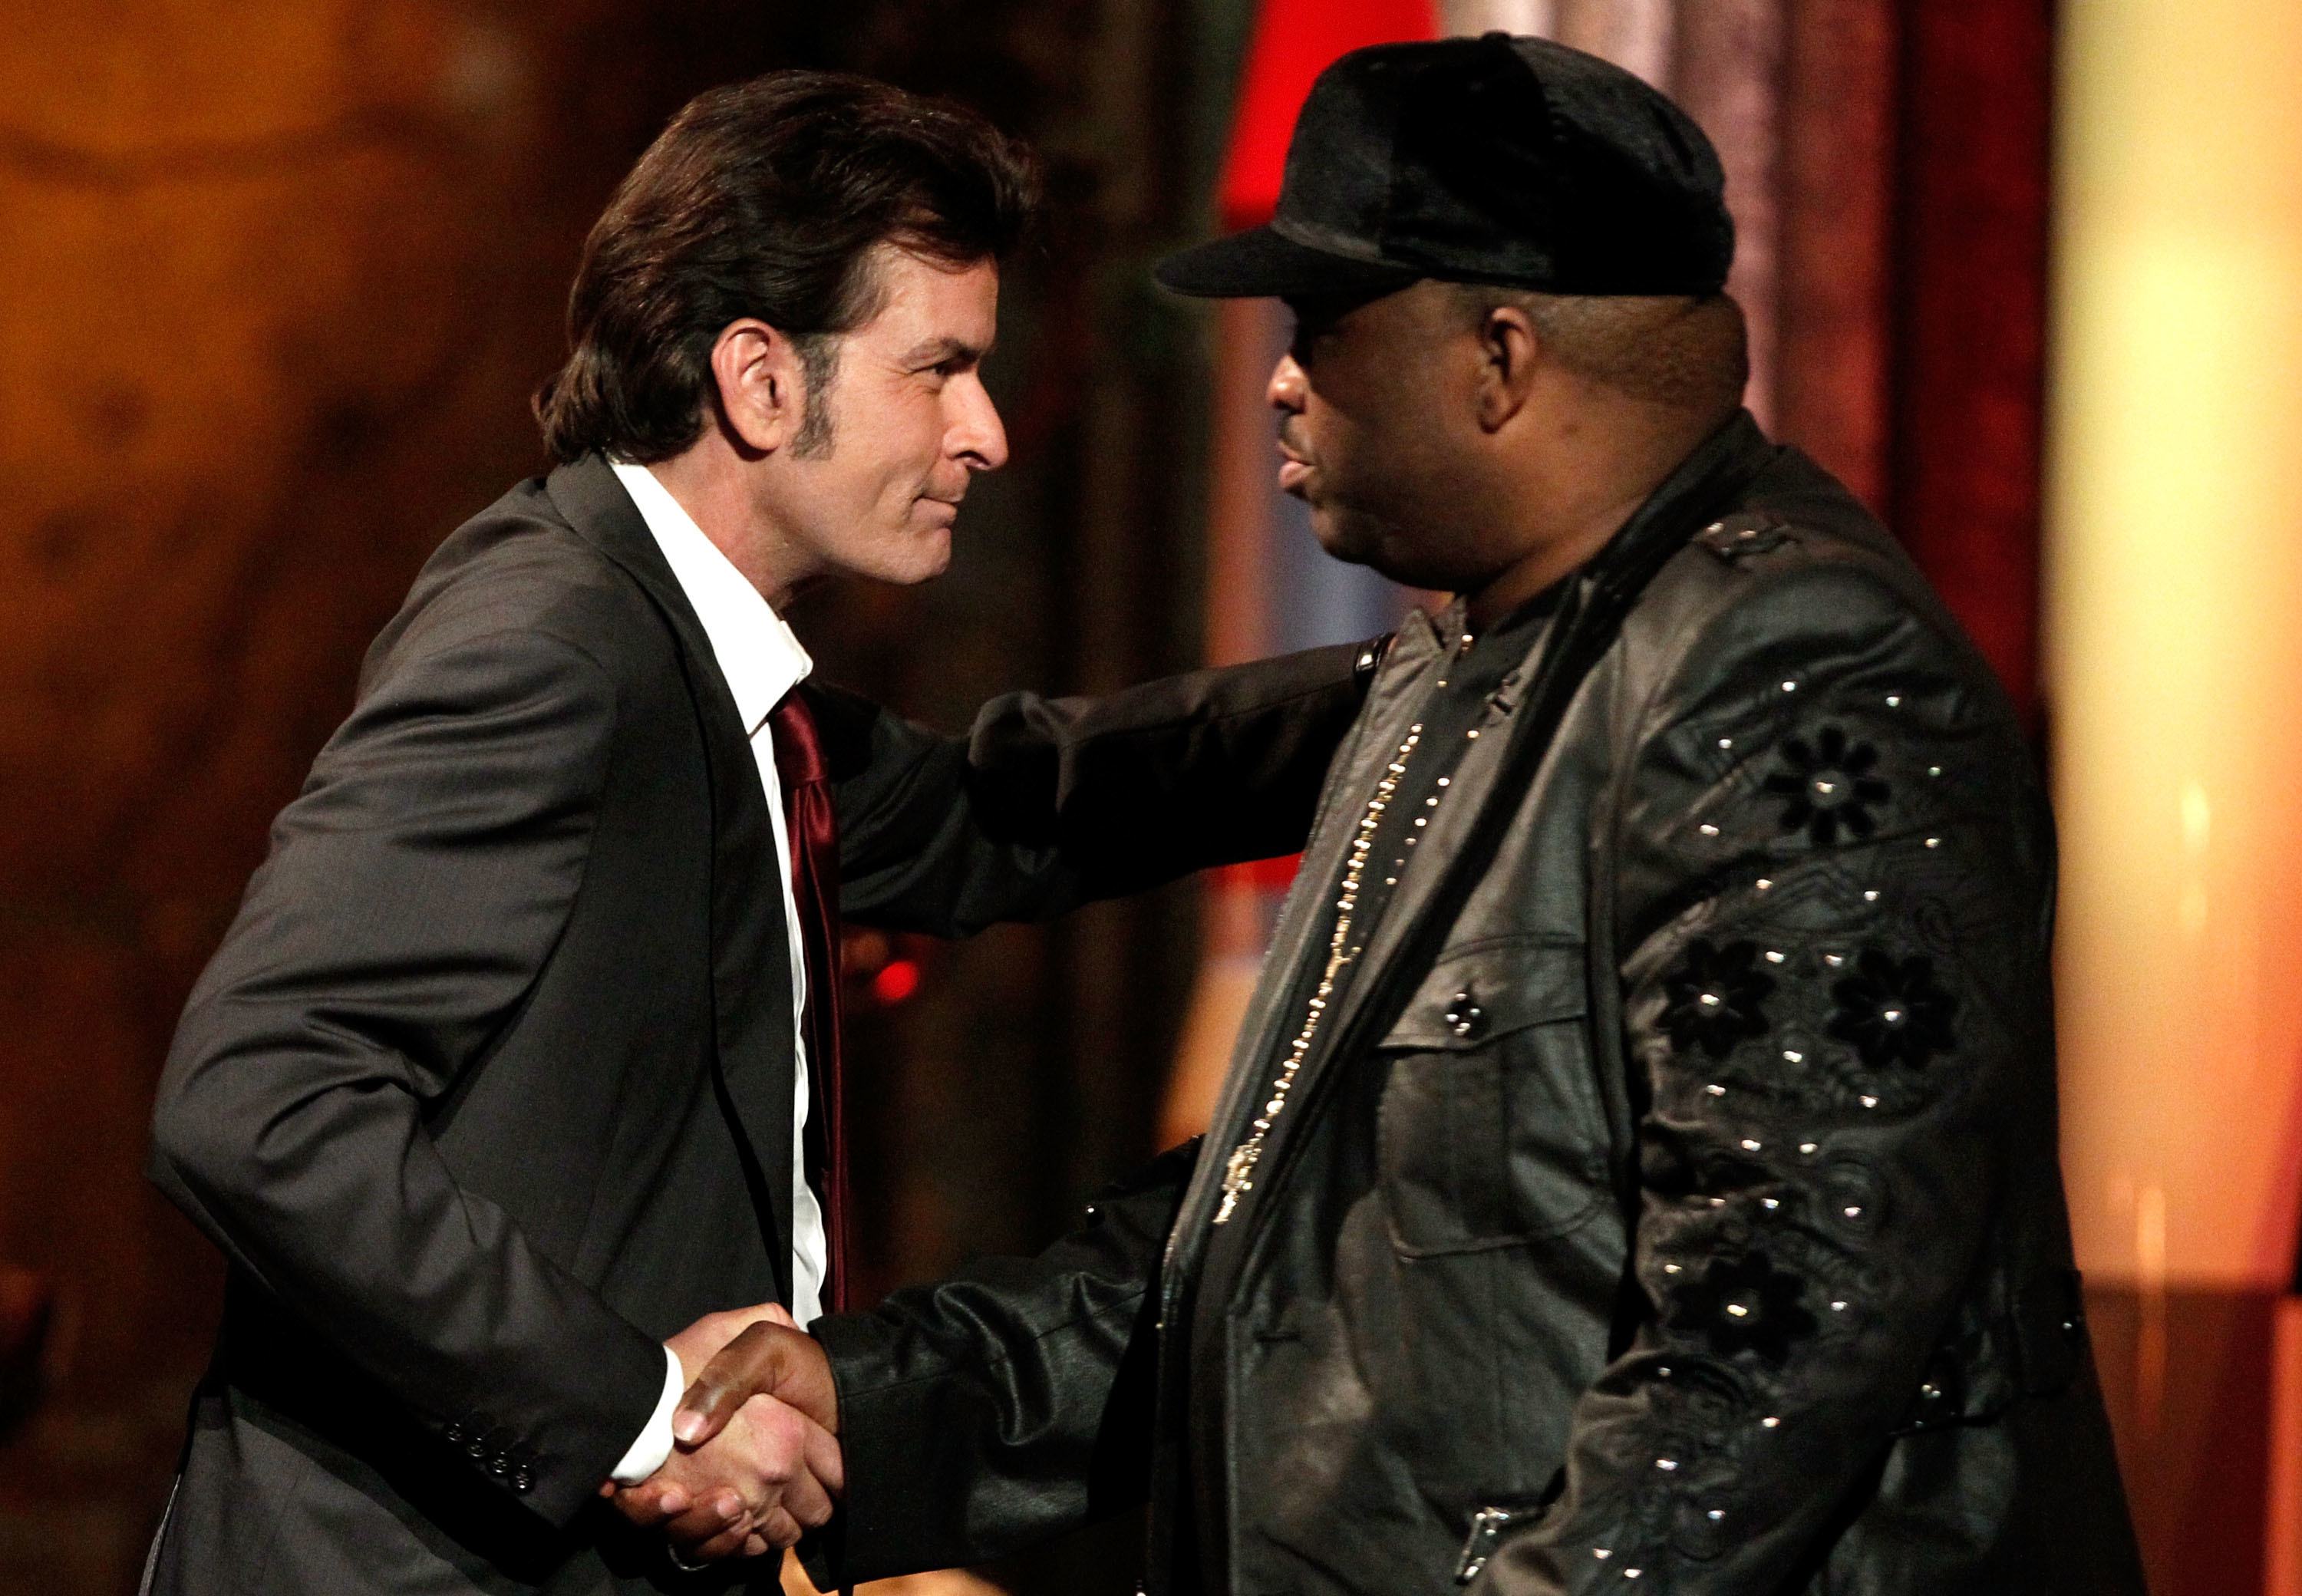 <p>Just a few months before he died, roast legend <a href="https://www.youtube.com/watch?v=zrUHxeVdbqI" rel="noopener noreferrer">Patrice O'Neal went up at the Sheen roast</a> and essentially threw out his planned material. Instead, he went after the other performers with some realness. He said Seth MacFarlane was jealous of his own cartoon. He called William Shatner an old racist. He claimed Anthony Jeselnik wasn't important enough for Patrice to learn his last name. He even critiqued the sets by Steve-O and Mike Tyson. Steve-O got his nose broken by Tyson's fist but it was probably less painful than O'Neal's set.</p><p>You may also like: <a href='https://www.yardbarker.com/entertainment/articles/the_best_tv_shows_that_lasted_only_one_season_110223/s1__29844374'>The best TV shows that lasted only one season</a></p>